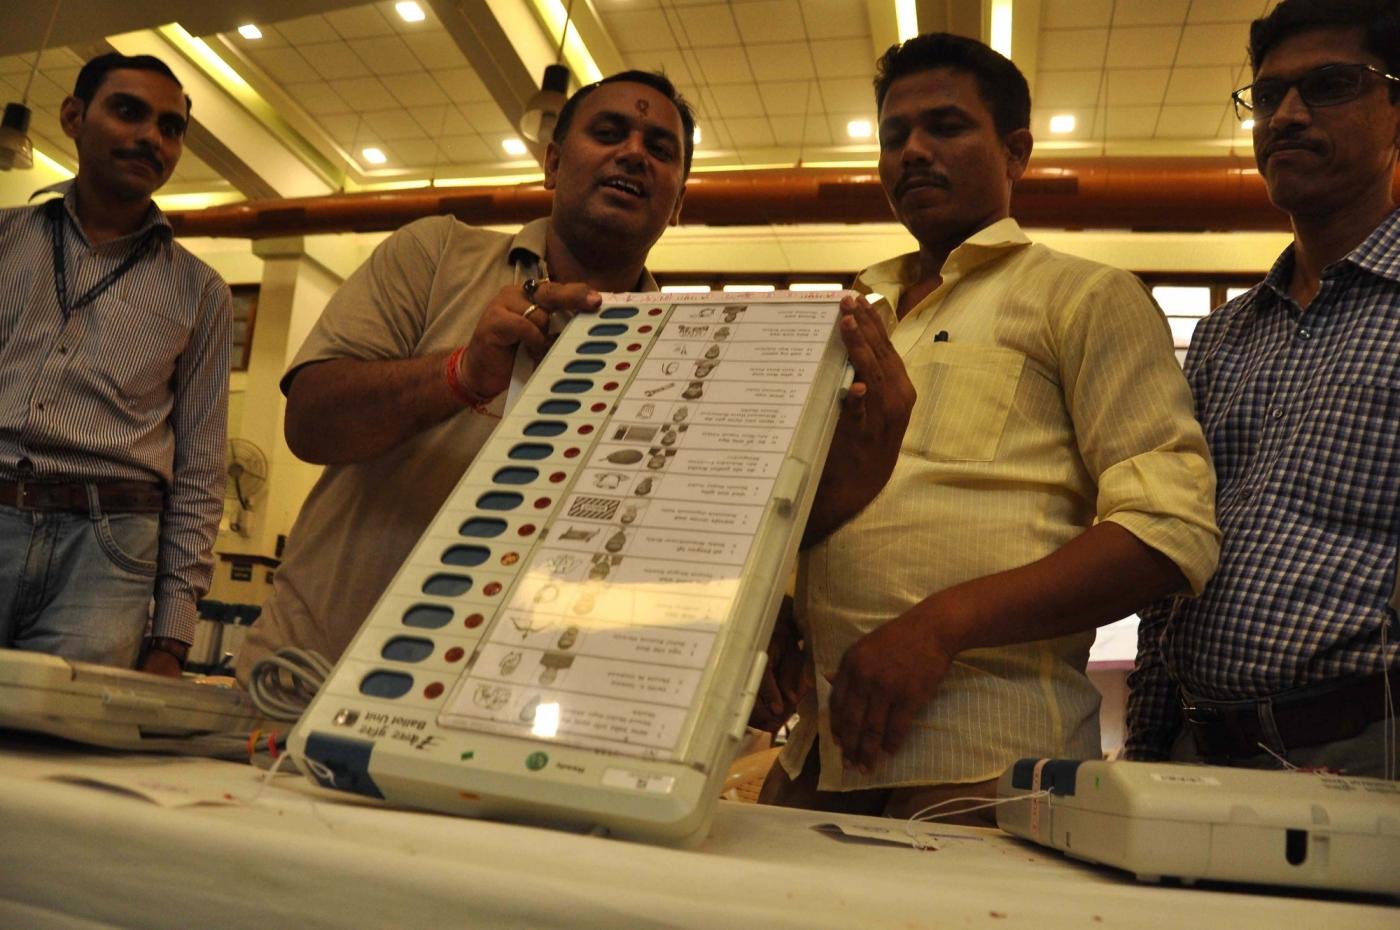 Mumbai: Polling officials check an Electronic Voting Machines (EVM) ahead of the 2019 Lok Sabha elections, at Dadar in Mumbai on April 22, 2019. (Photo: IANS) by . 